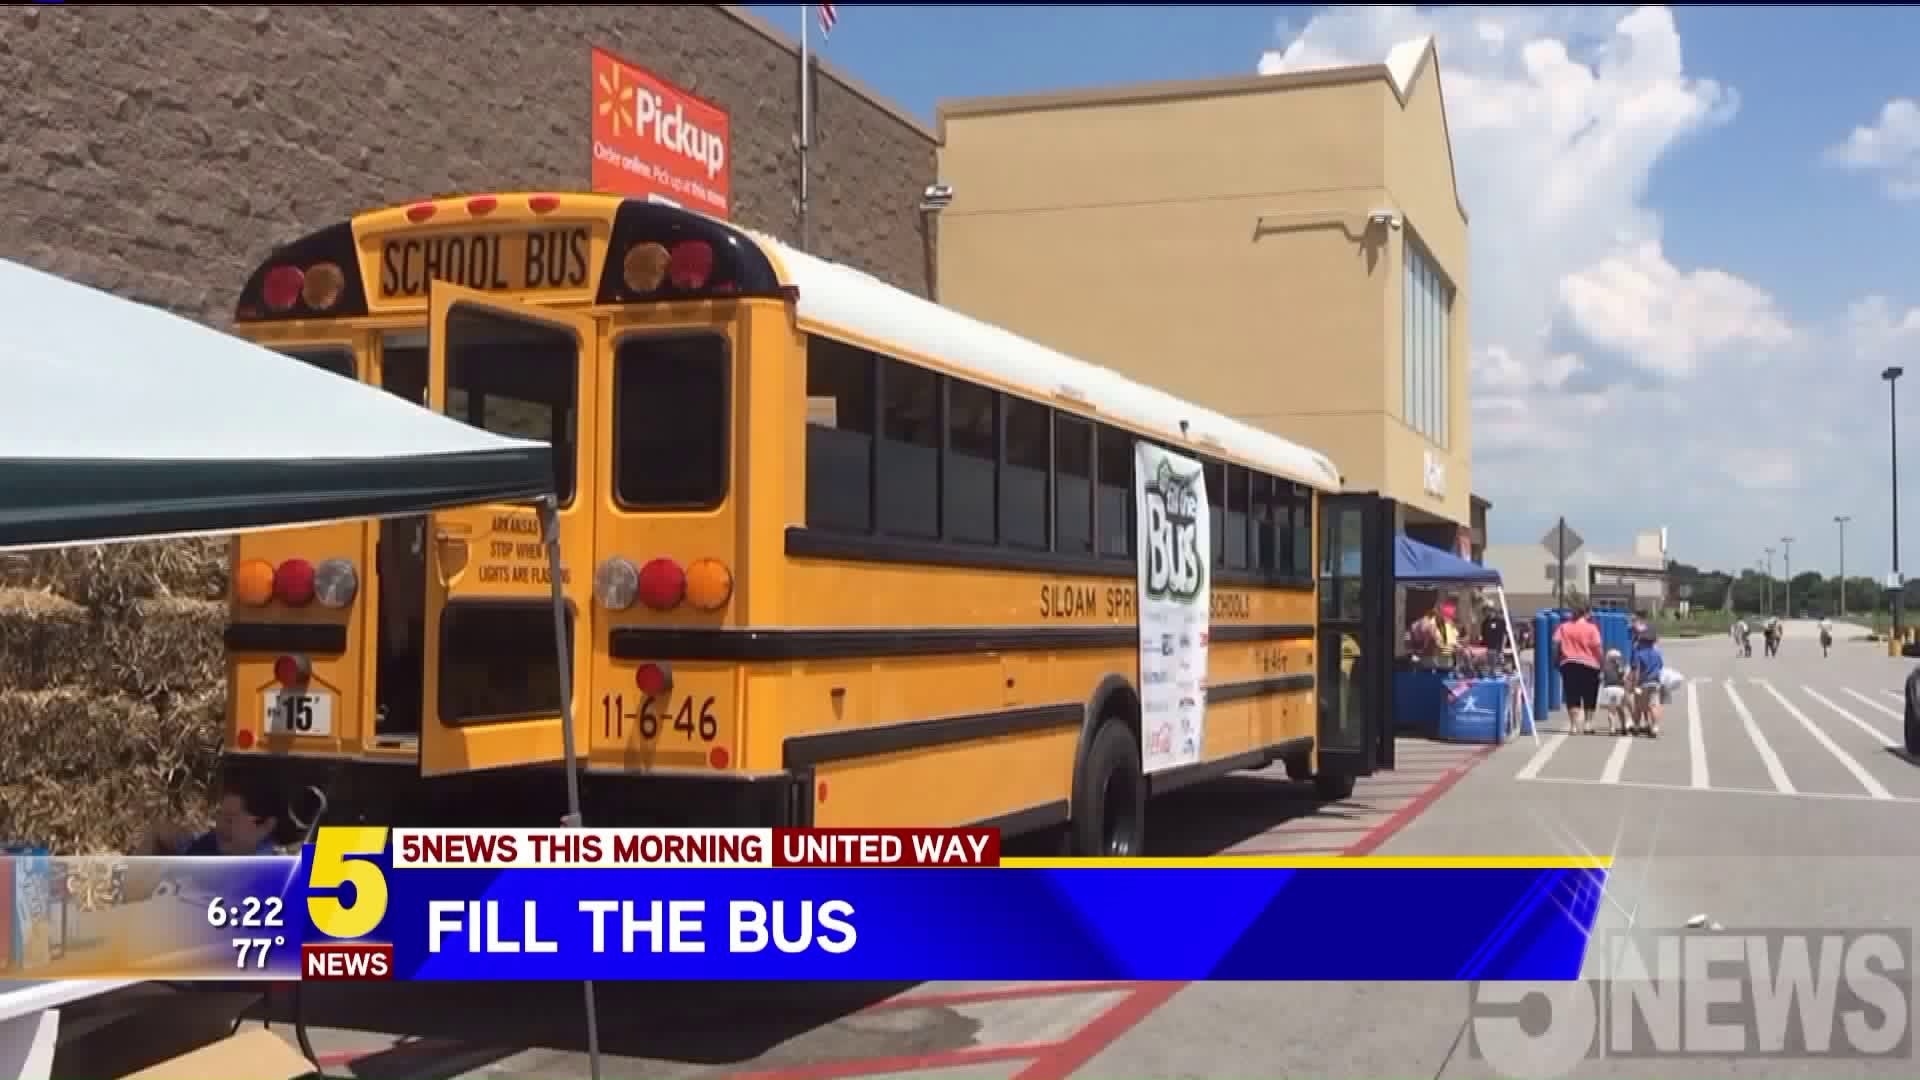 UNITED WAY FILL THE BUS